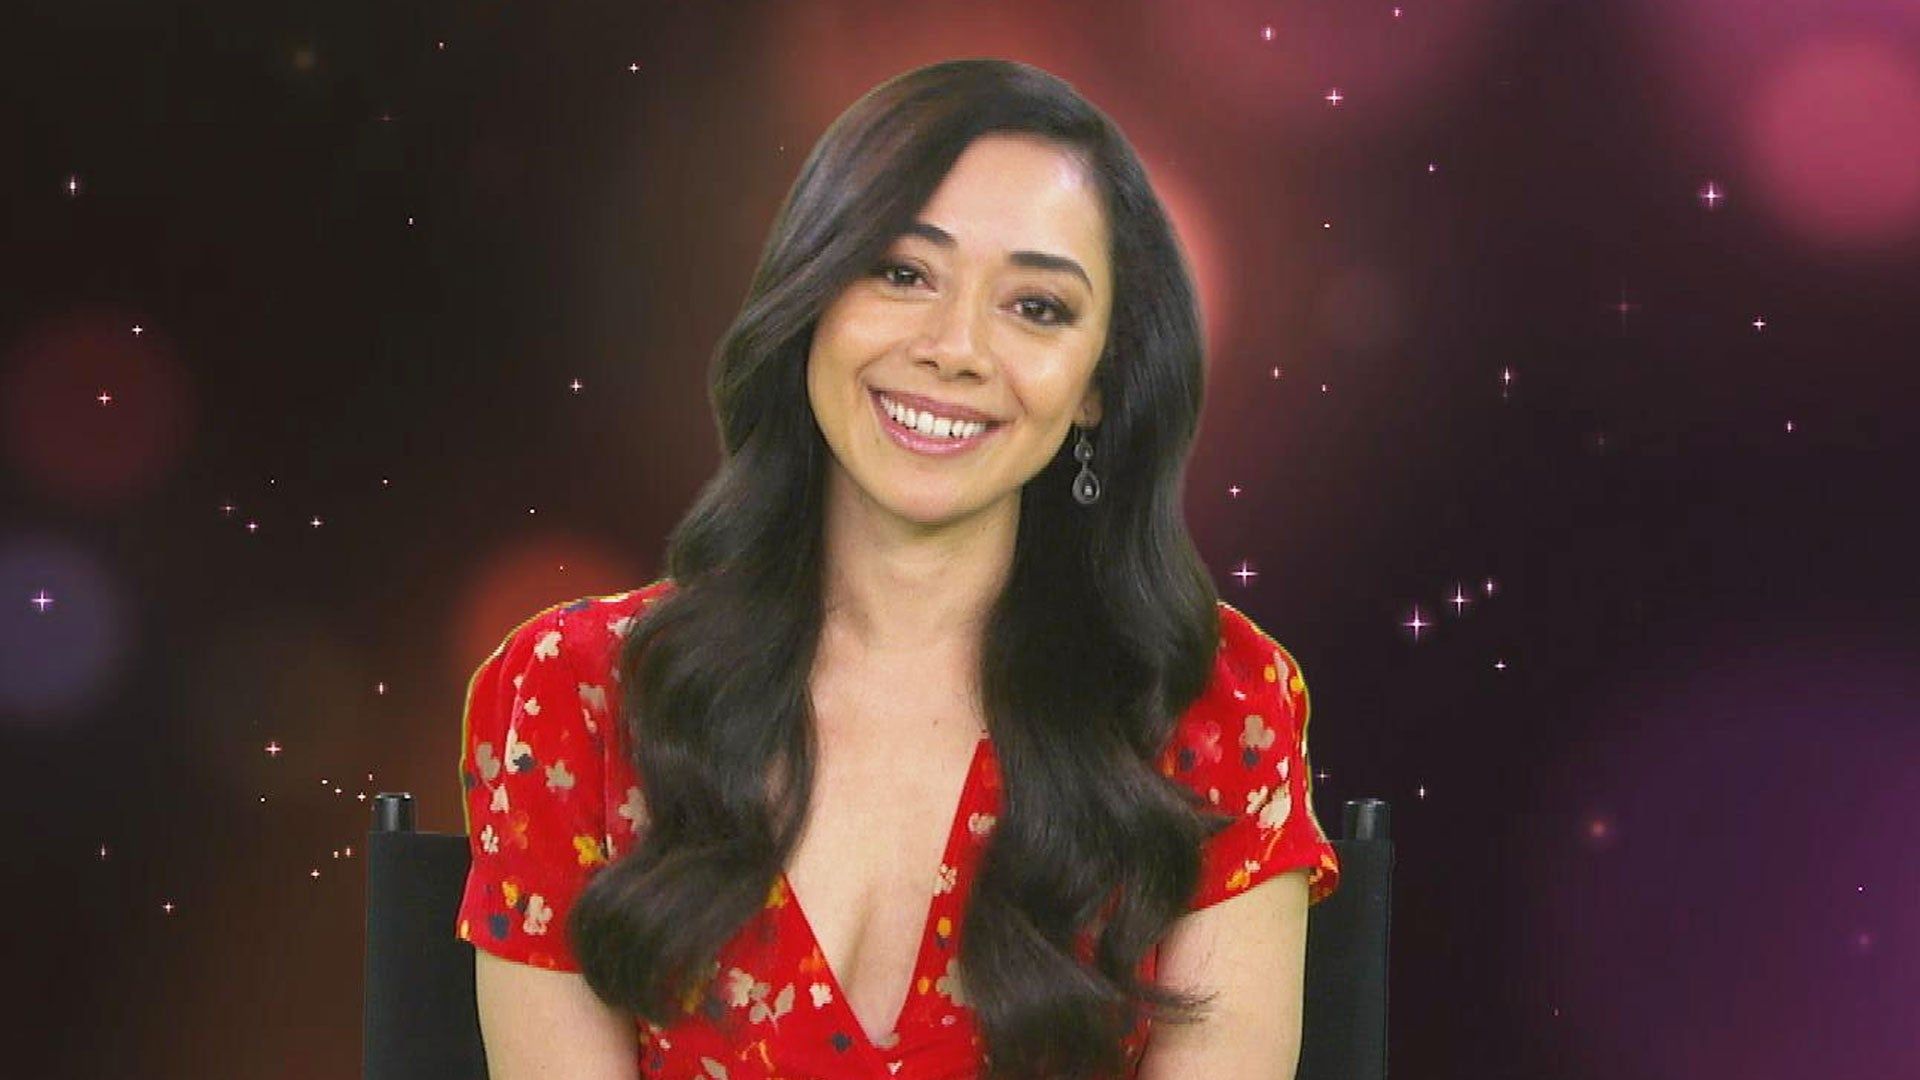 Aimee Garcia has shared a beautiful picture of her, wishing everyone a Happy New Year! (Picture)